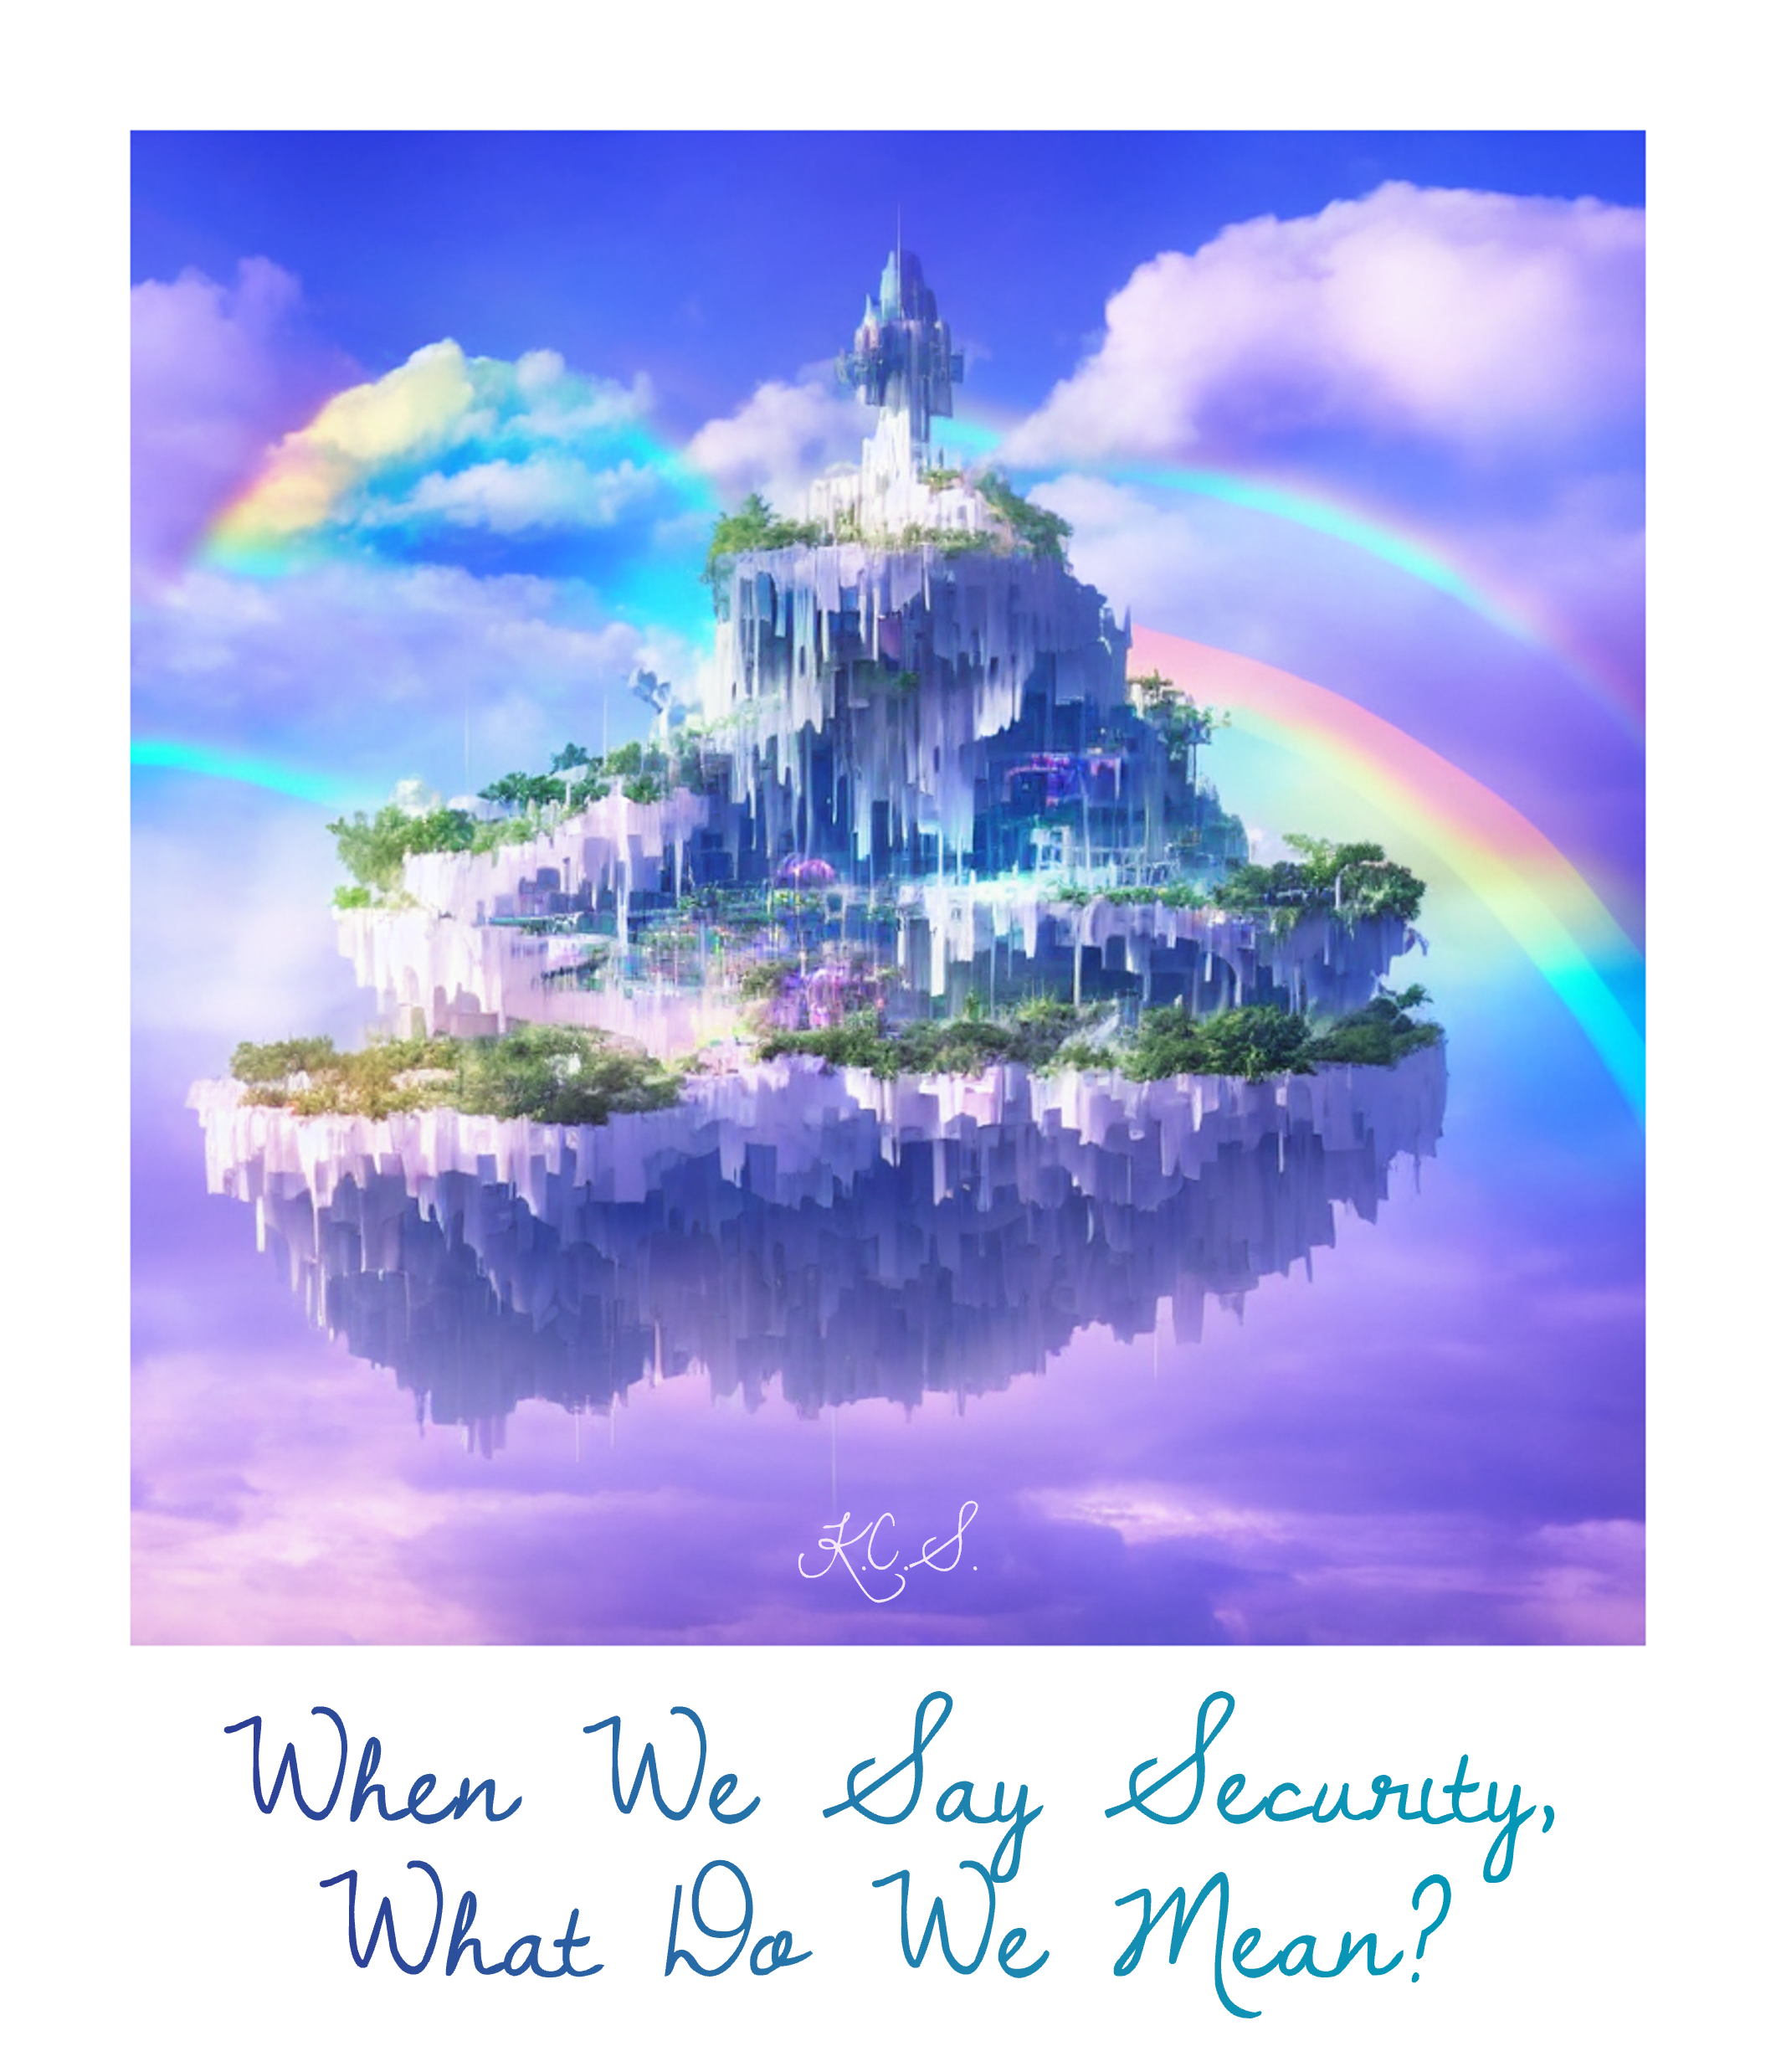 A faux polaroid picture with an AI-generated image signed by yours truly. It depicts an island floating in a sky filled with rainbow and pastel clouds in shades of periwinkle and violet. The island itself is a paradise, a blend of fantasy and cyberpunk aesthetics. Lush trees blanket its ledges while waterfalls cascade from each ledge, frozen in time and resembling a beautiful digital glitch. It is meant to reflect the utopia we might achieve with our systems &ndash; our own islands &ndash; if we embraced the original meanings of the word security.